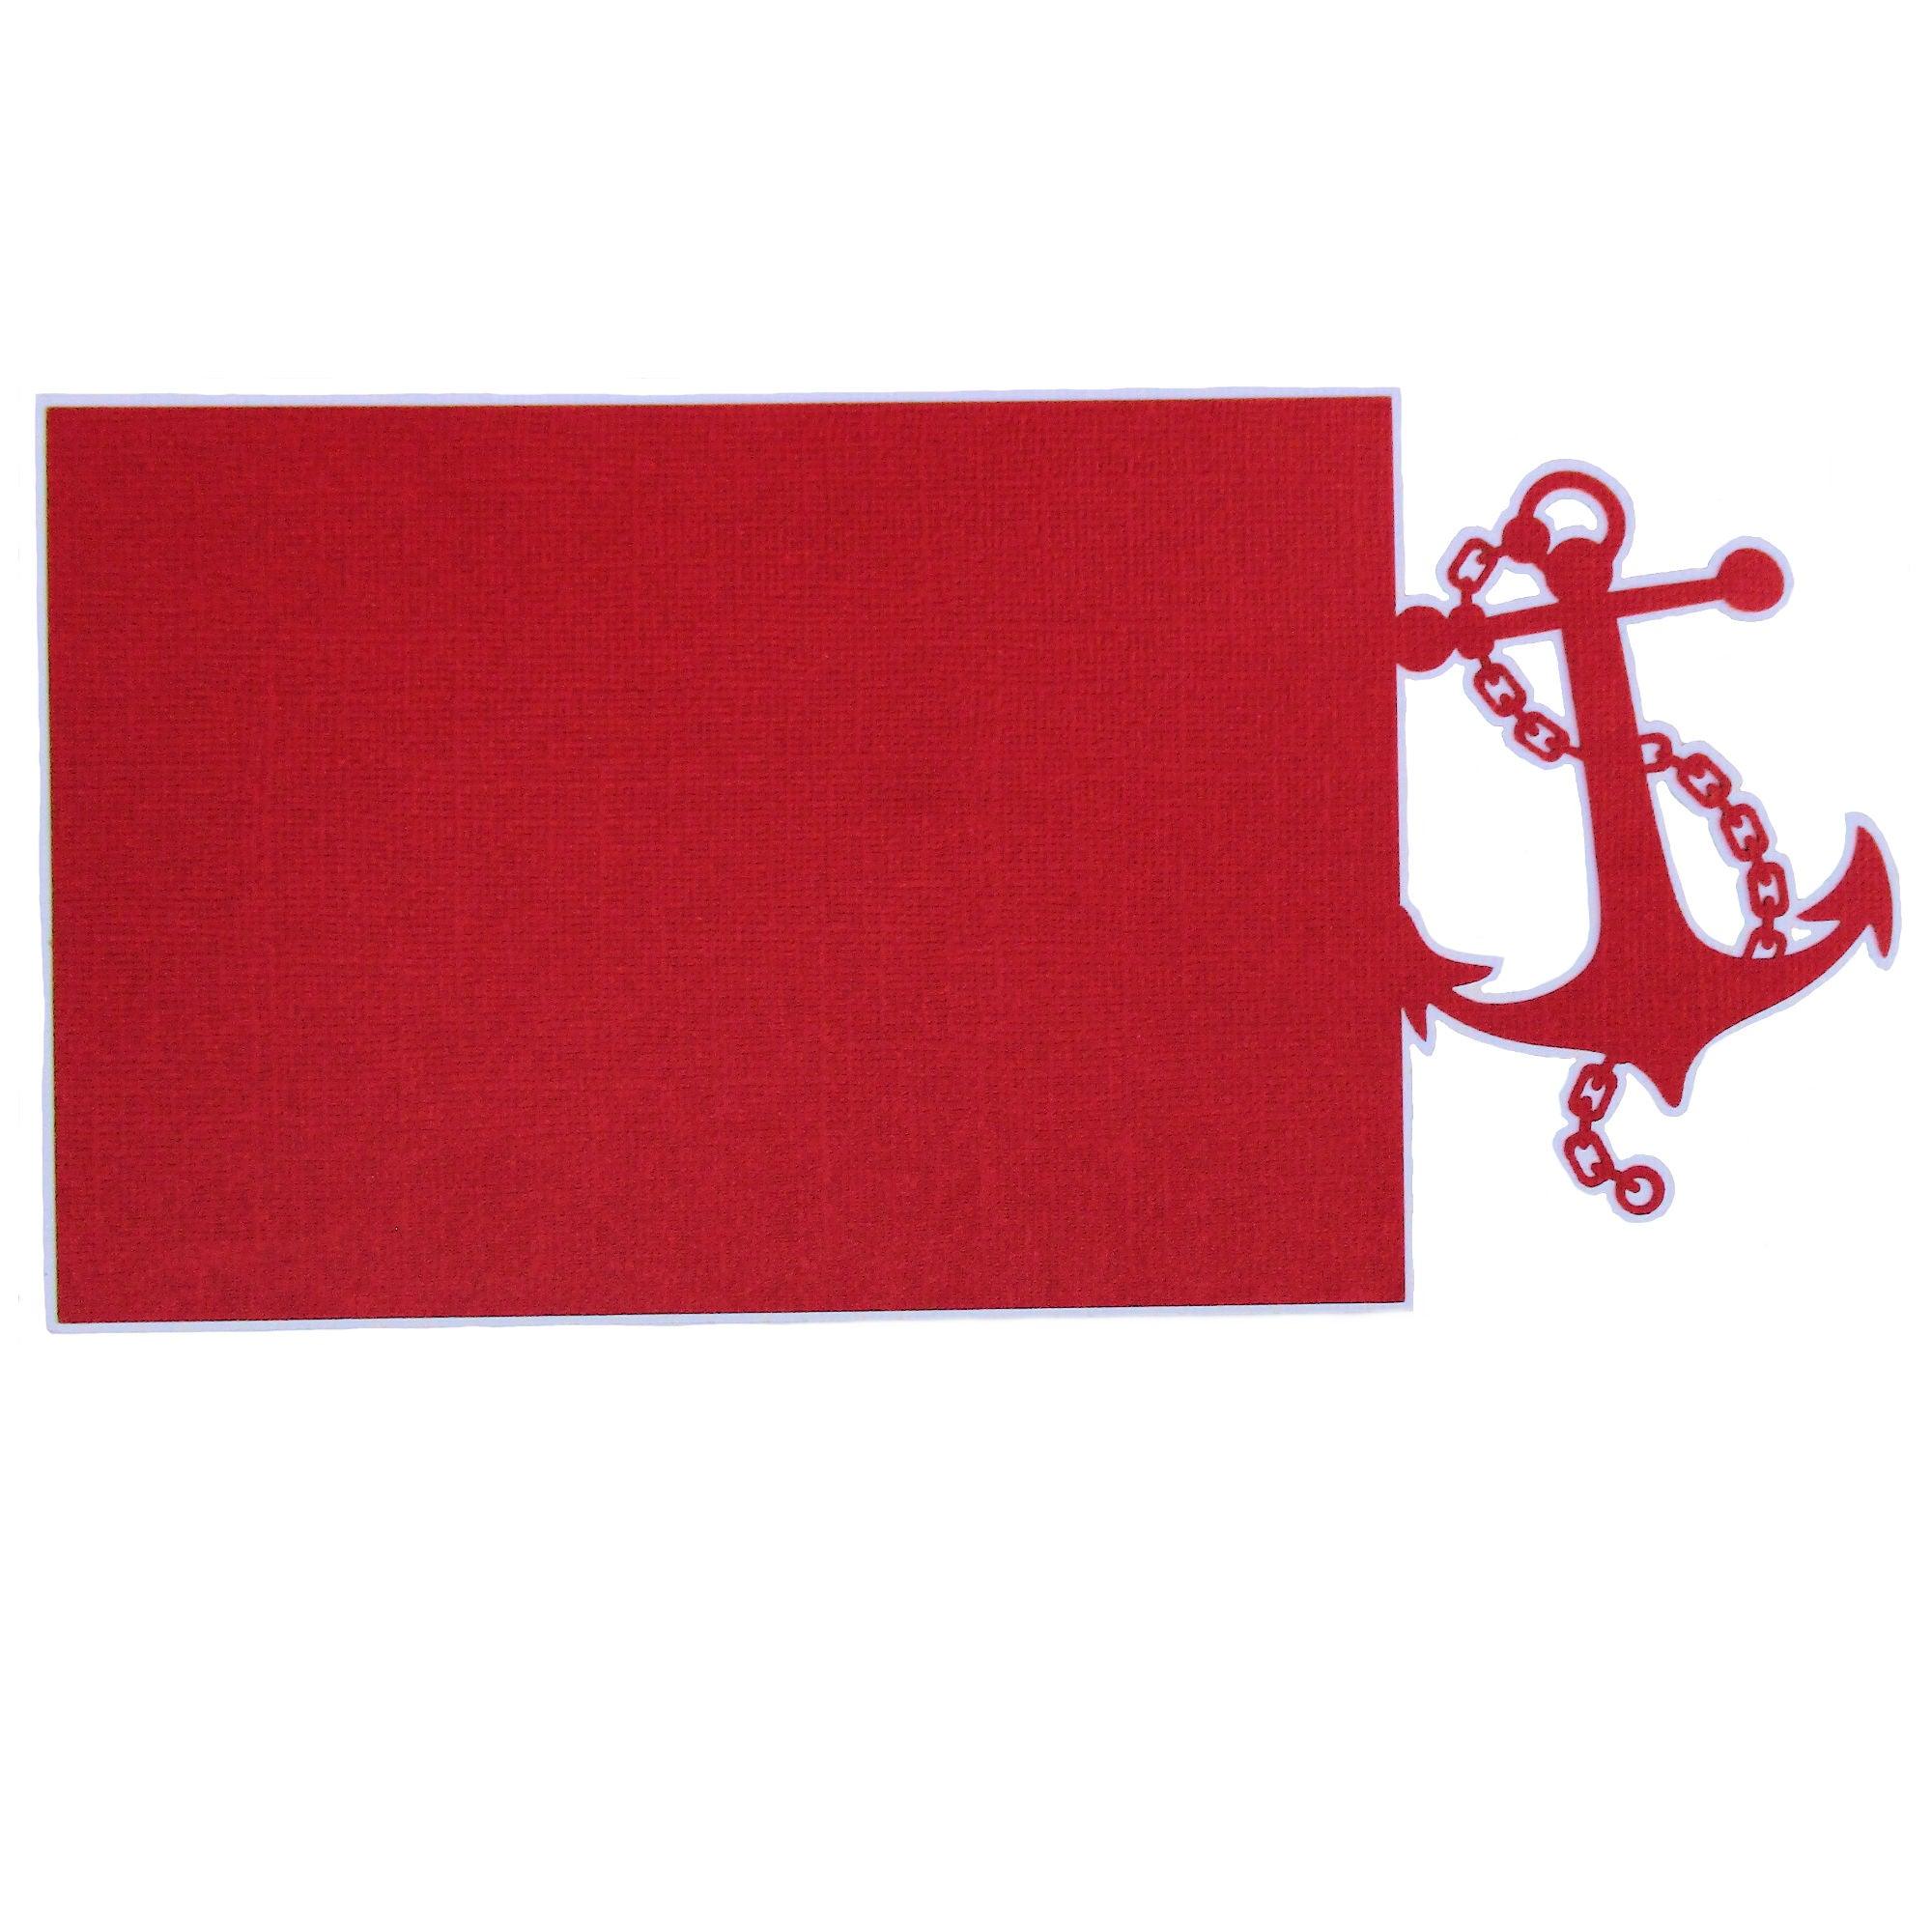 Cruise Anchor Red on White 4.25 x 6.25 Laser Cut Scrapbook Photo Mat Frame by SSC Laser Designs